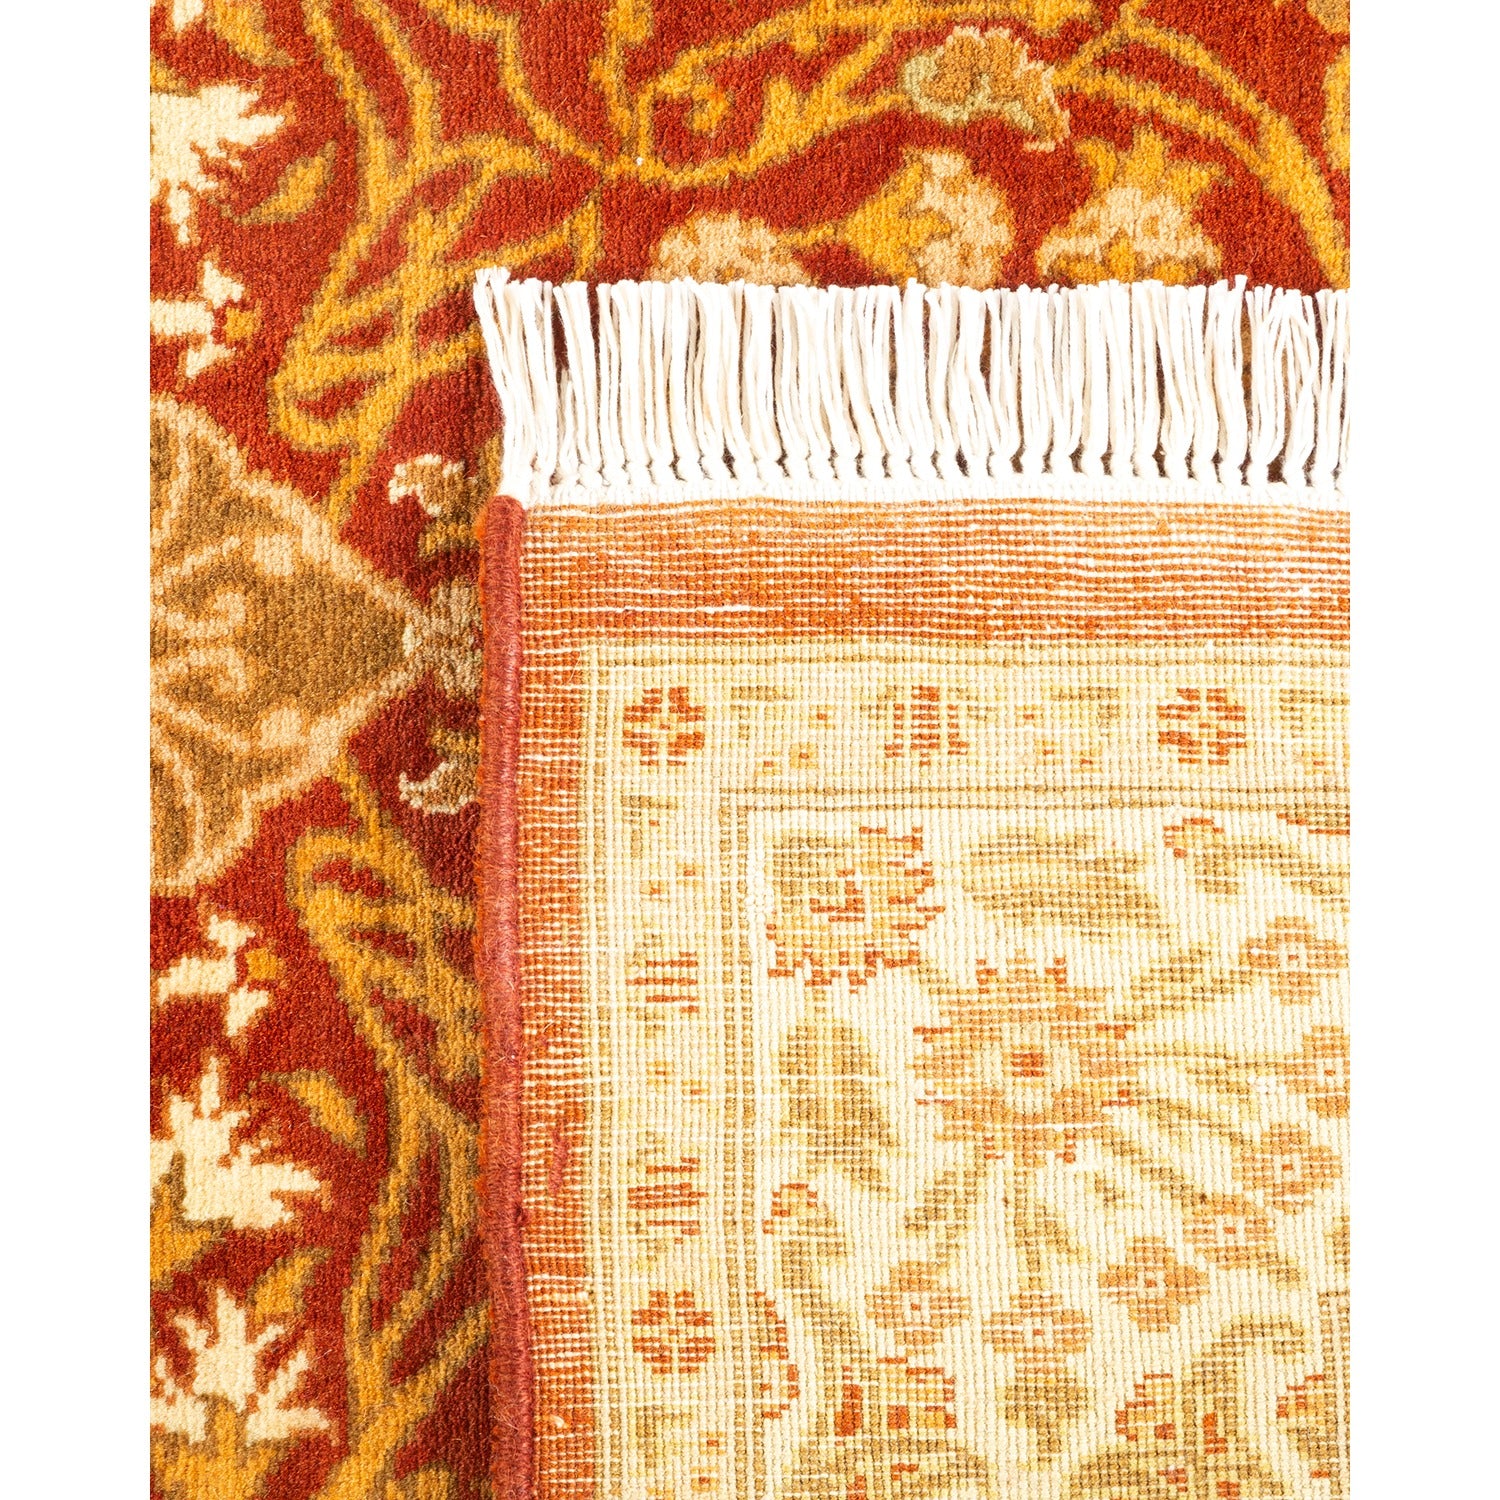 Close-up of hand-woven rug showcasing intricate patterns in warm tones.